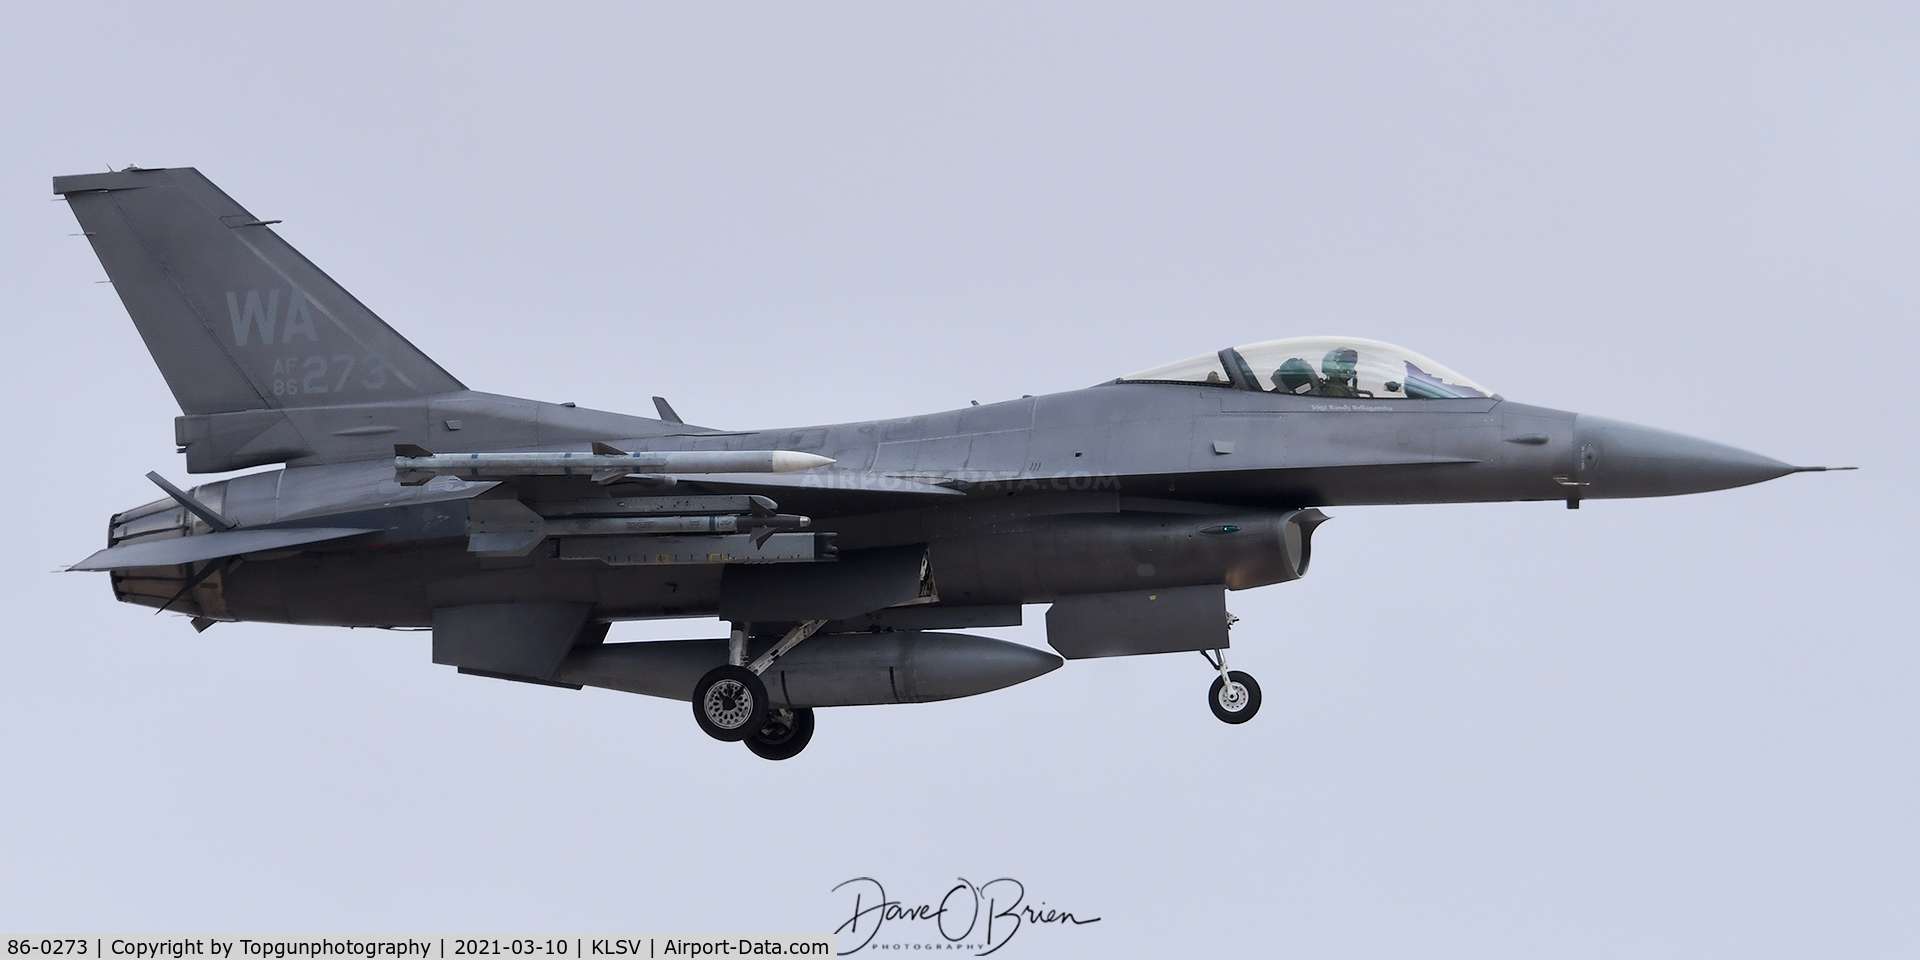 86-0273, 1986 General Dynamics F-16C Fighting Falcon C/N 5C-379, In the new Have Glass paint scheme.